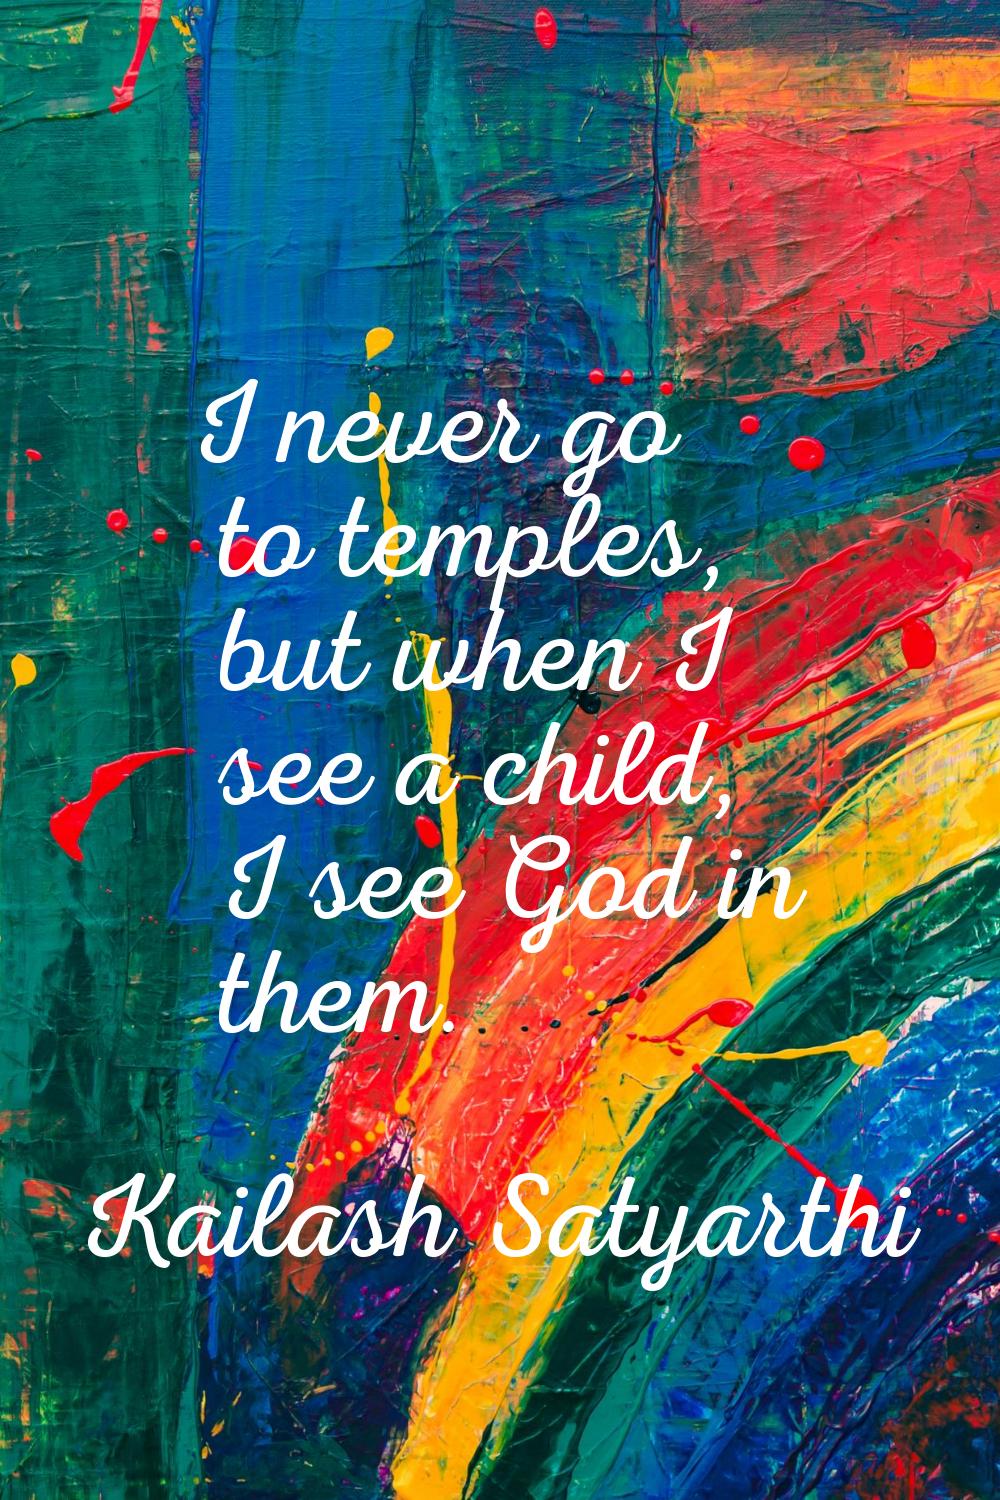 I never go to temples, but when I see a child, I see God in them.